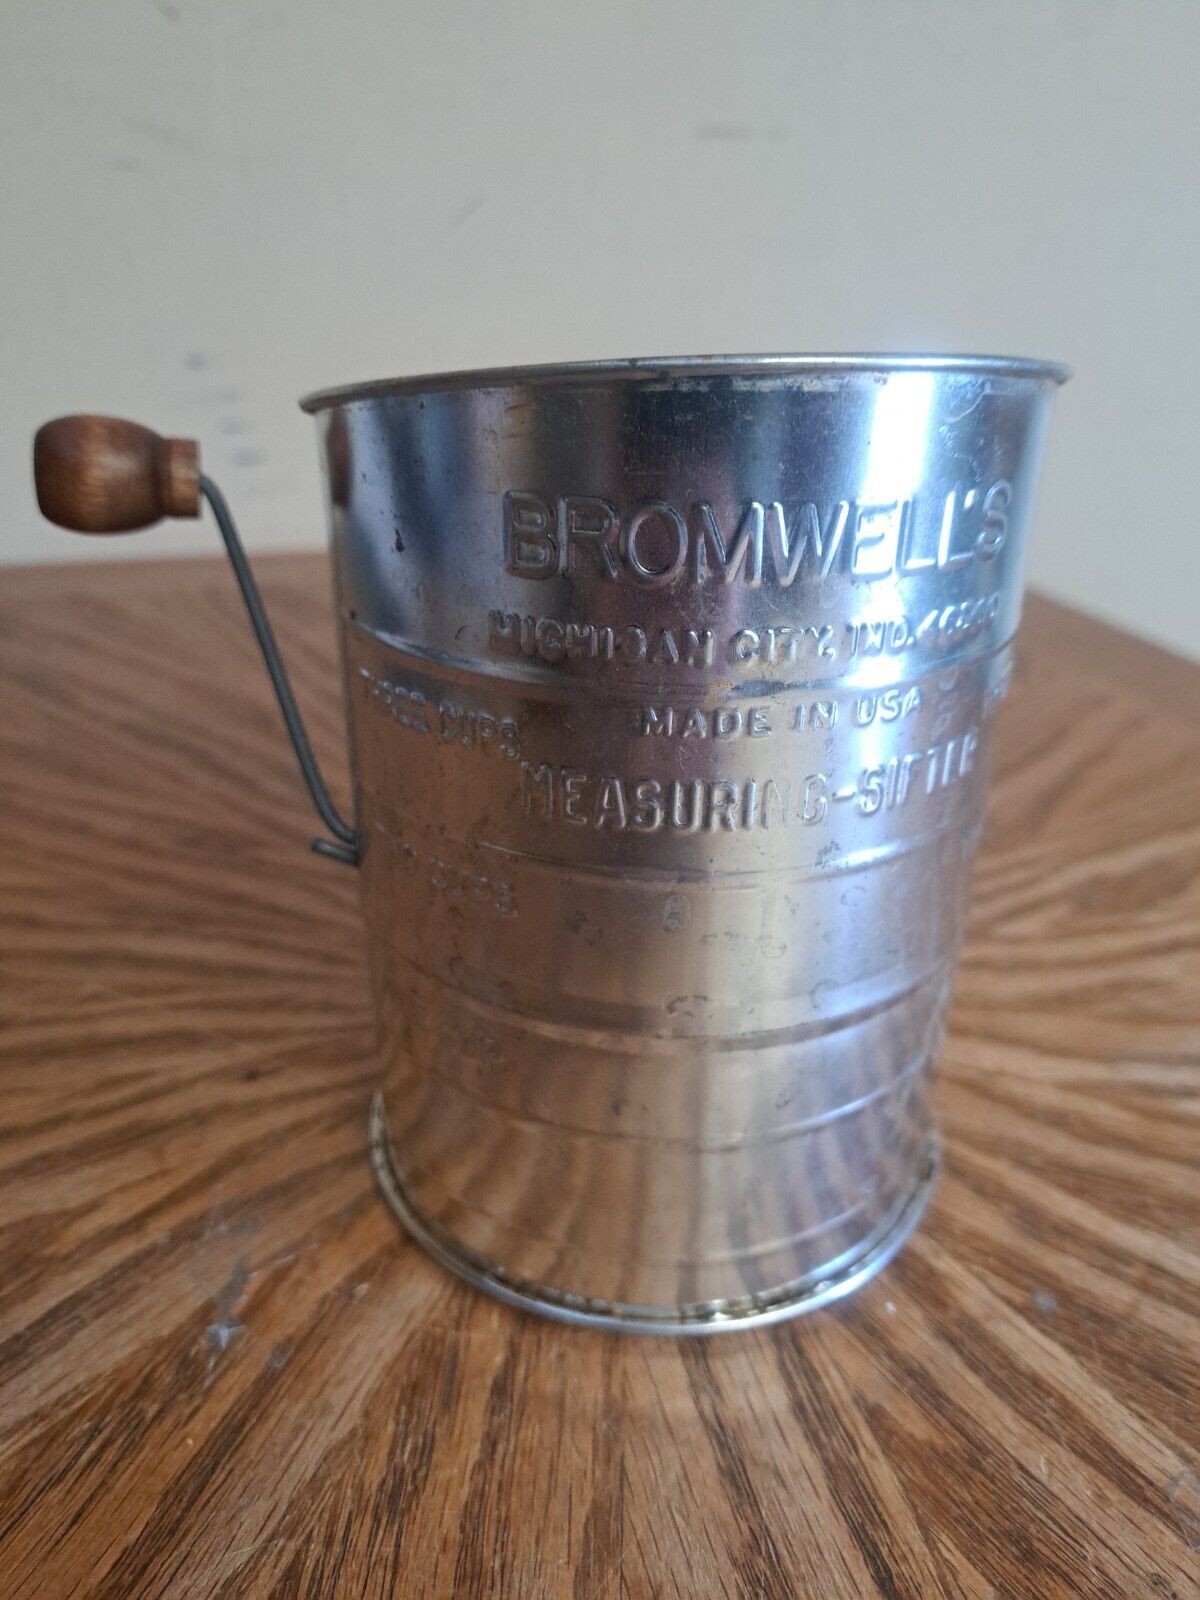 Vintage Bromwell\'s 3-Cup Metal Measuring Flour Sifter W/Wooden Handle - USA Made